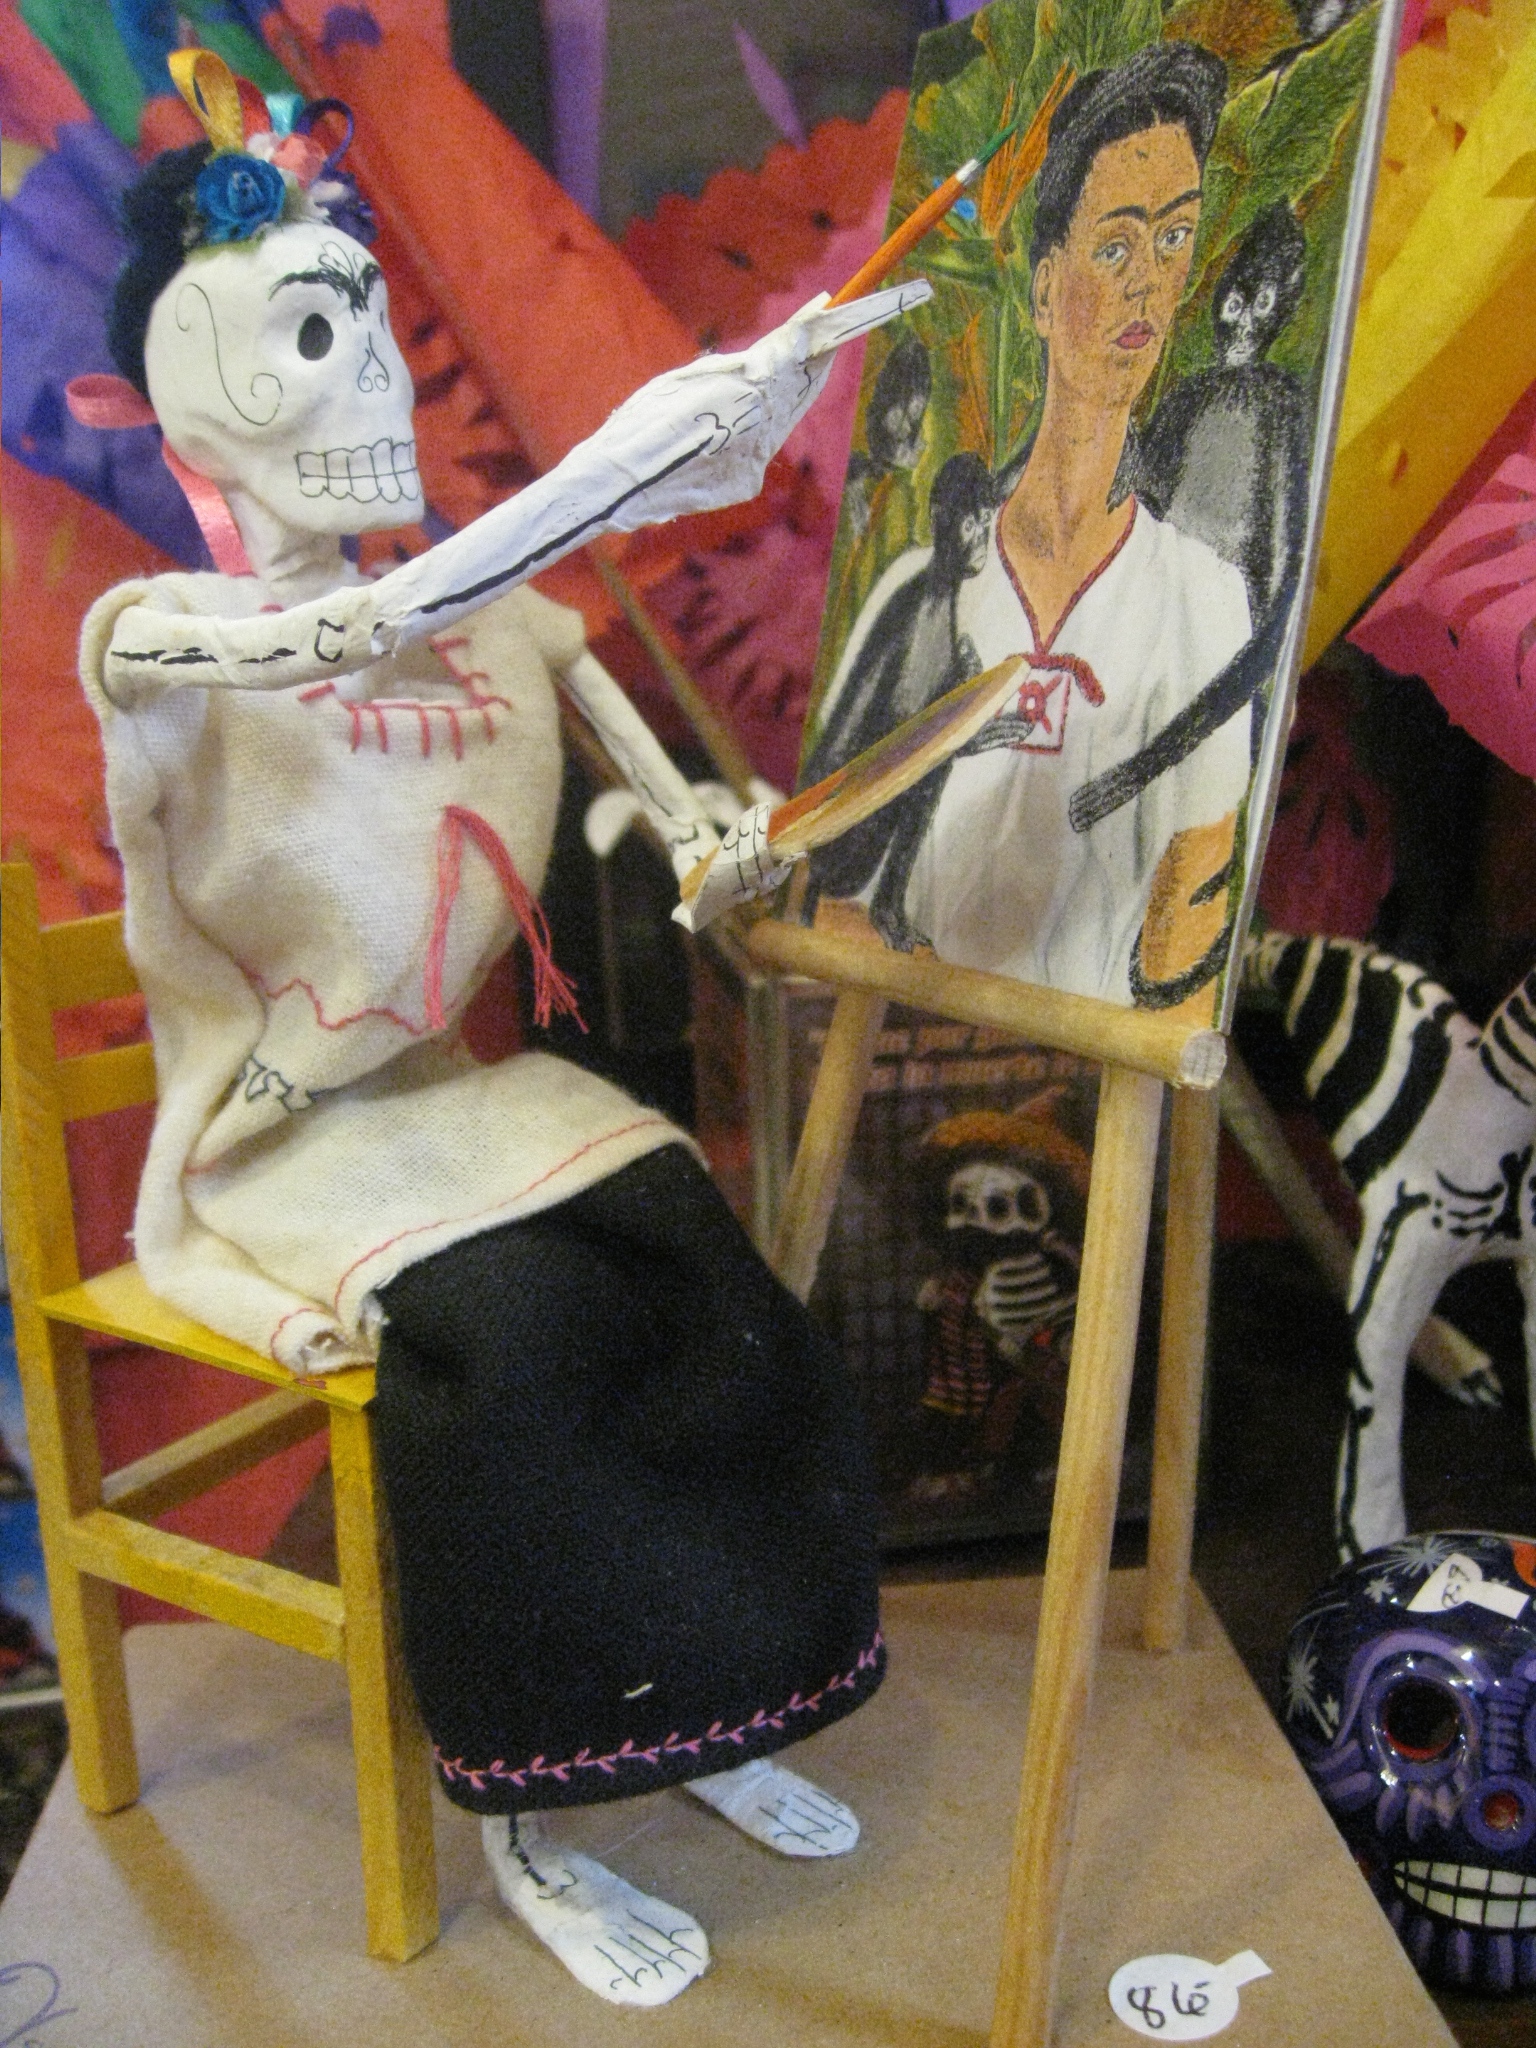 New! Day of the Dead Figurines, Wall Hangings, and More!